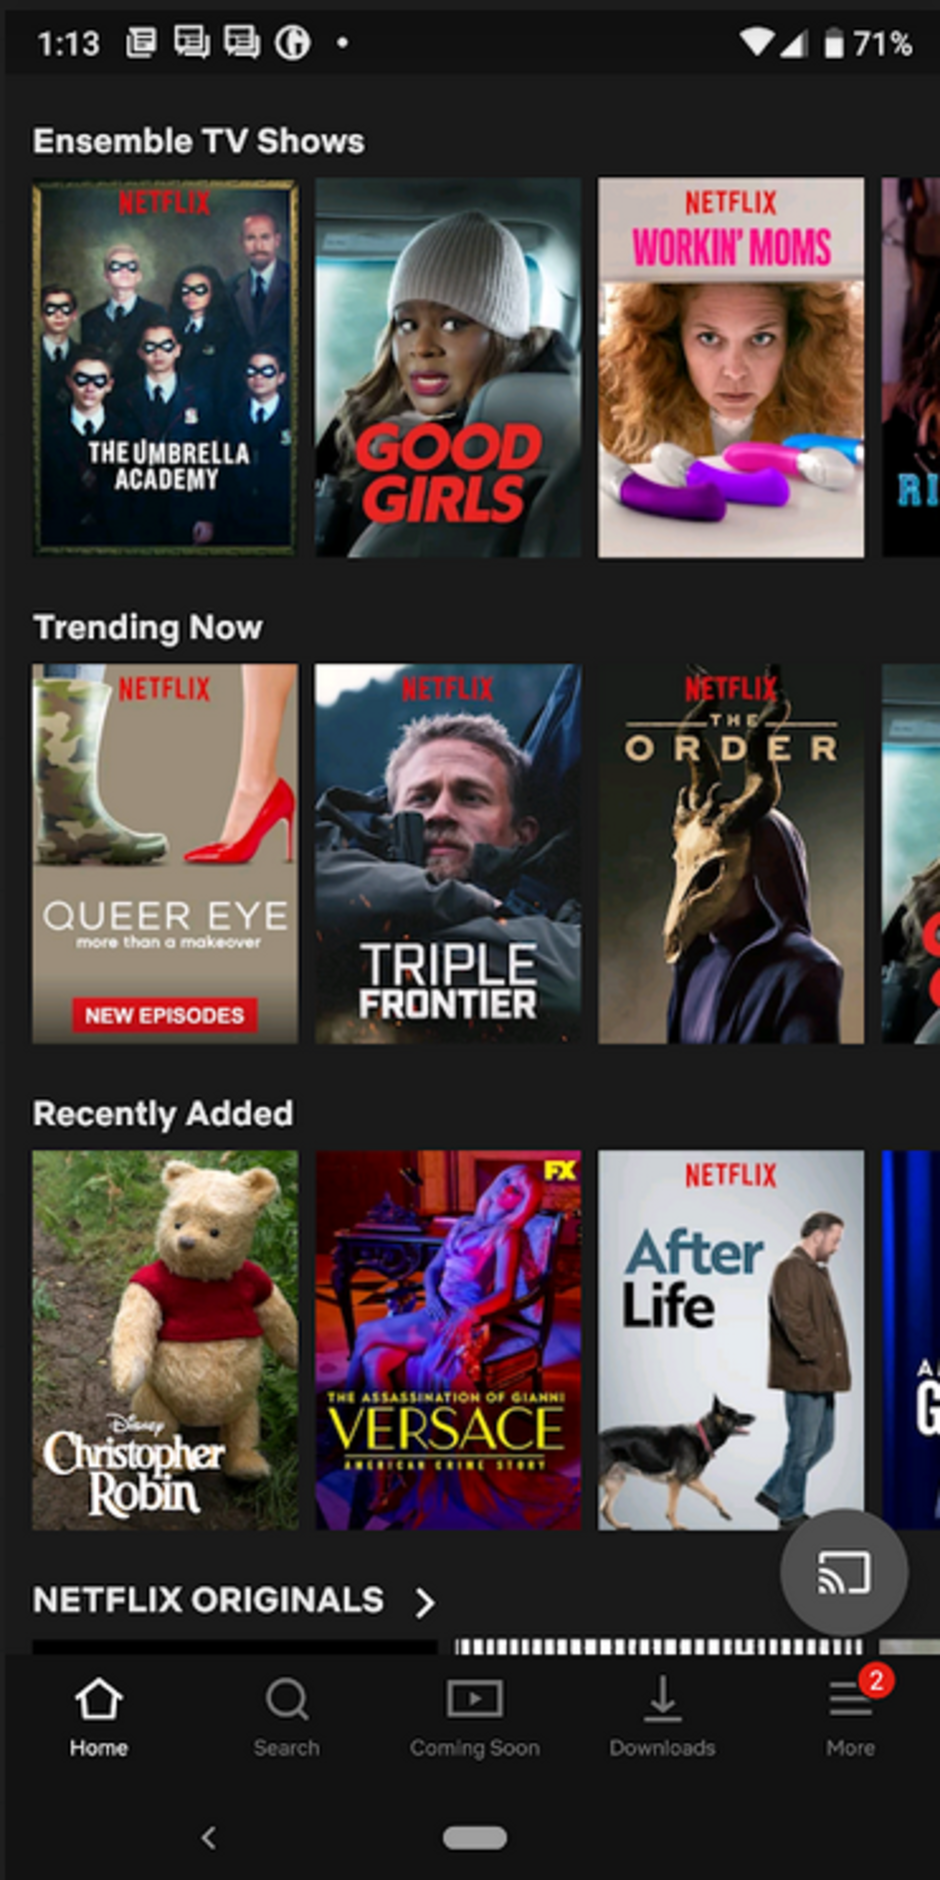 The current grid-based UI used by Netflix for its Android app - Netflix CEO hints that a major redesign is coming